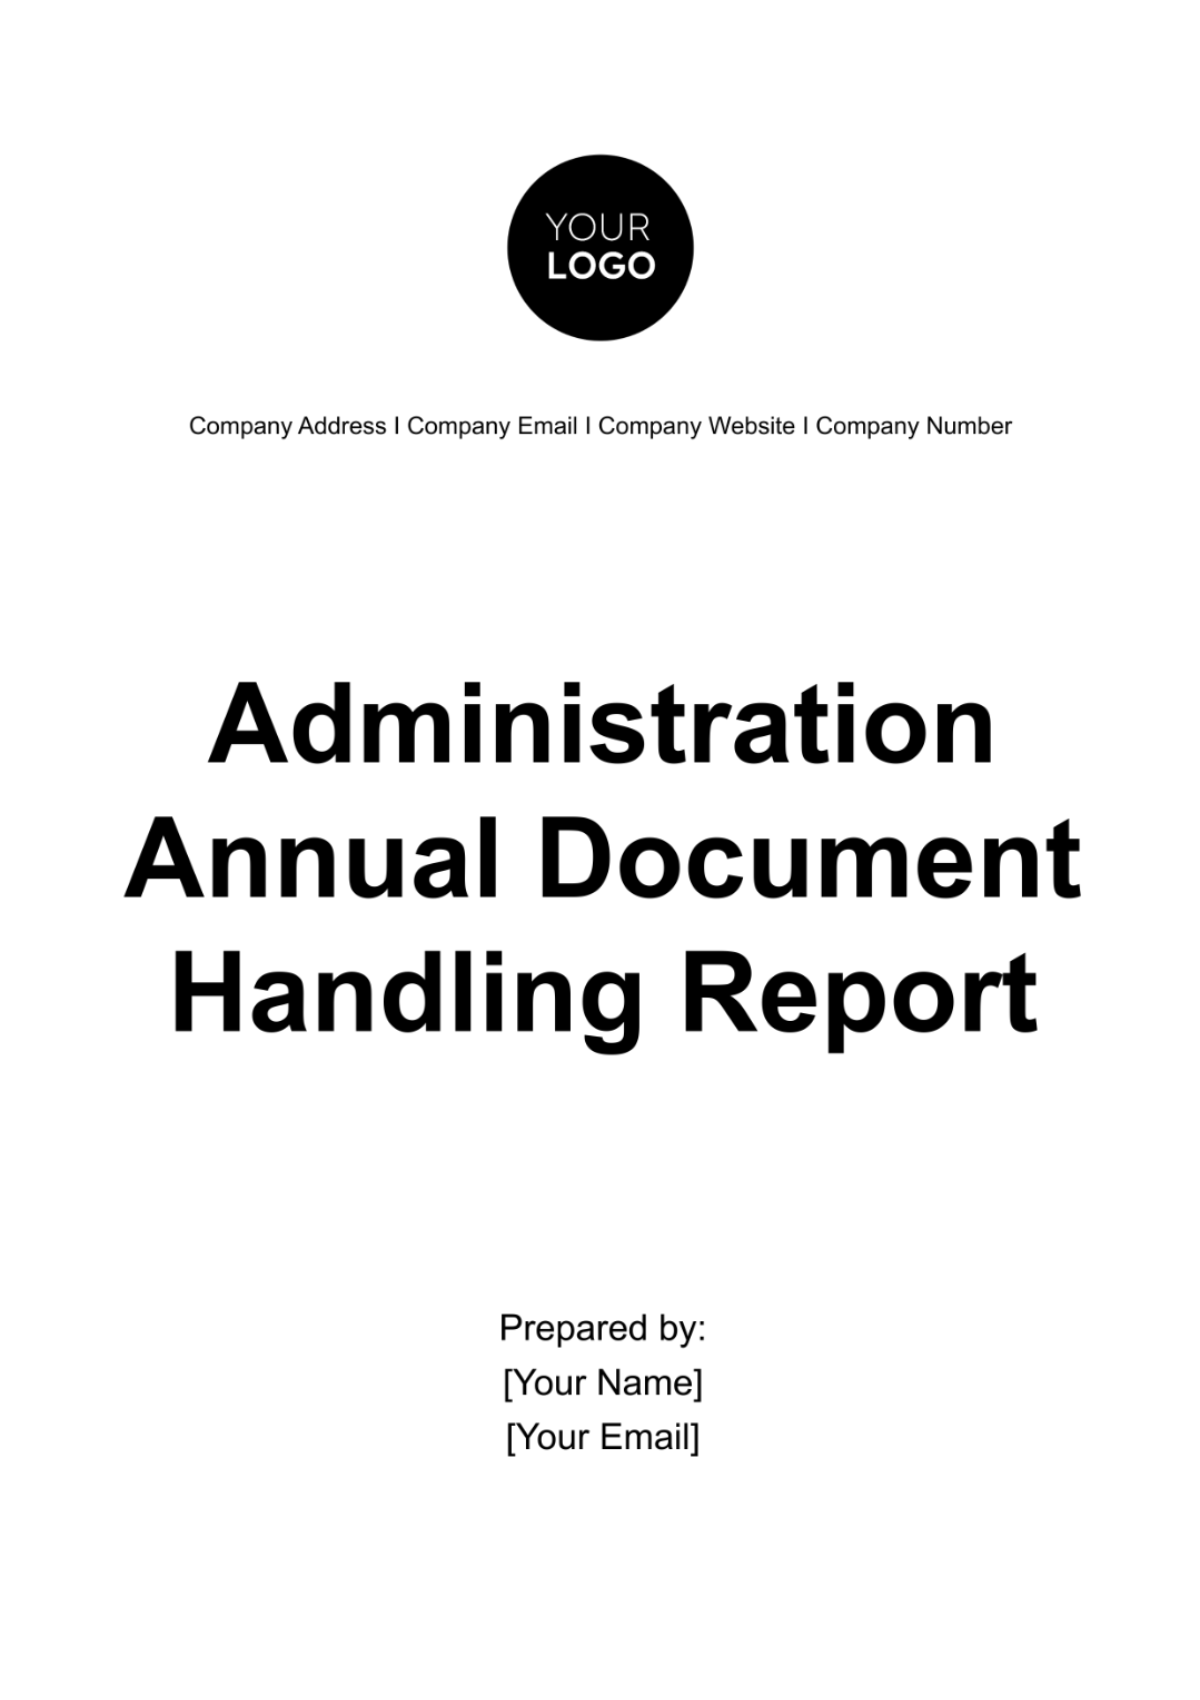 Free Administration Annual Document Handling Report Template